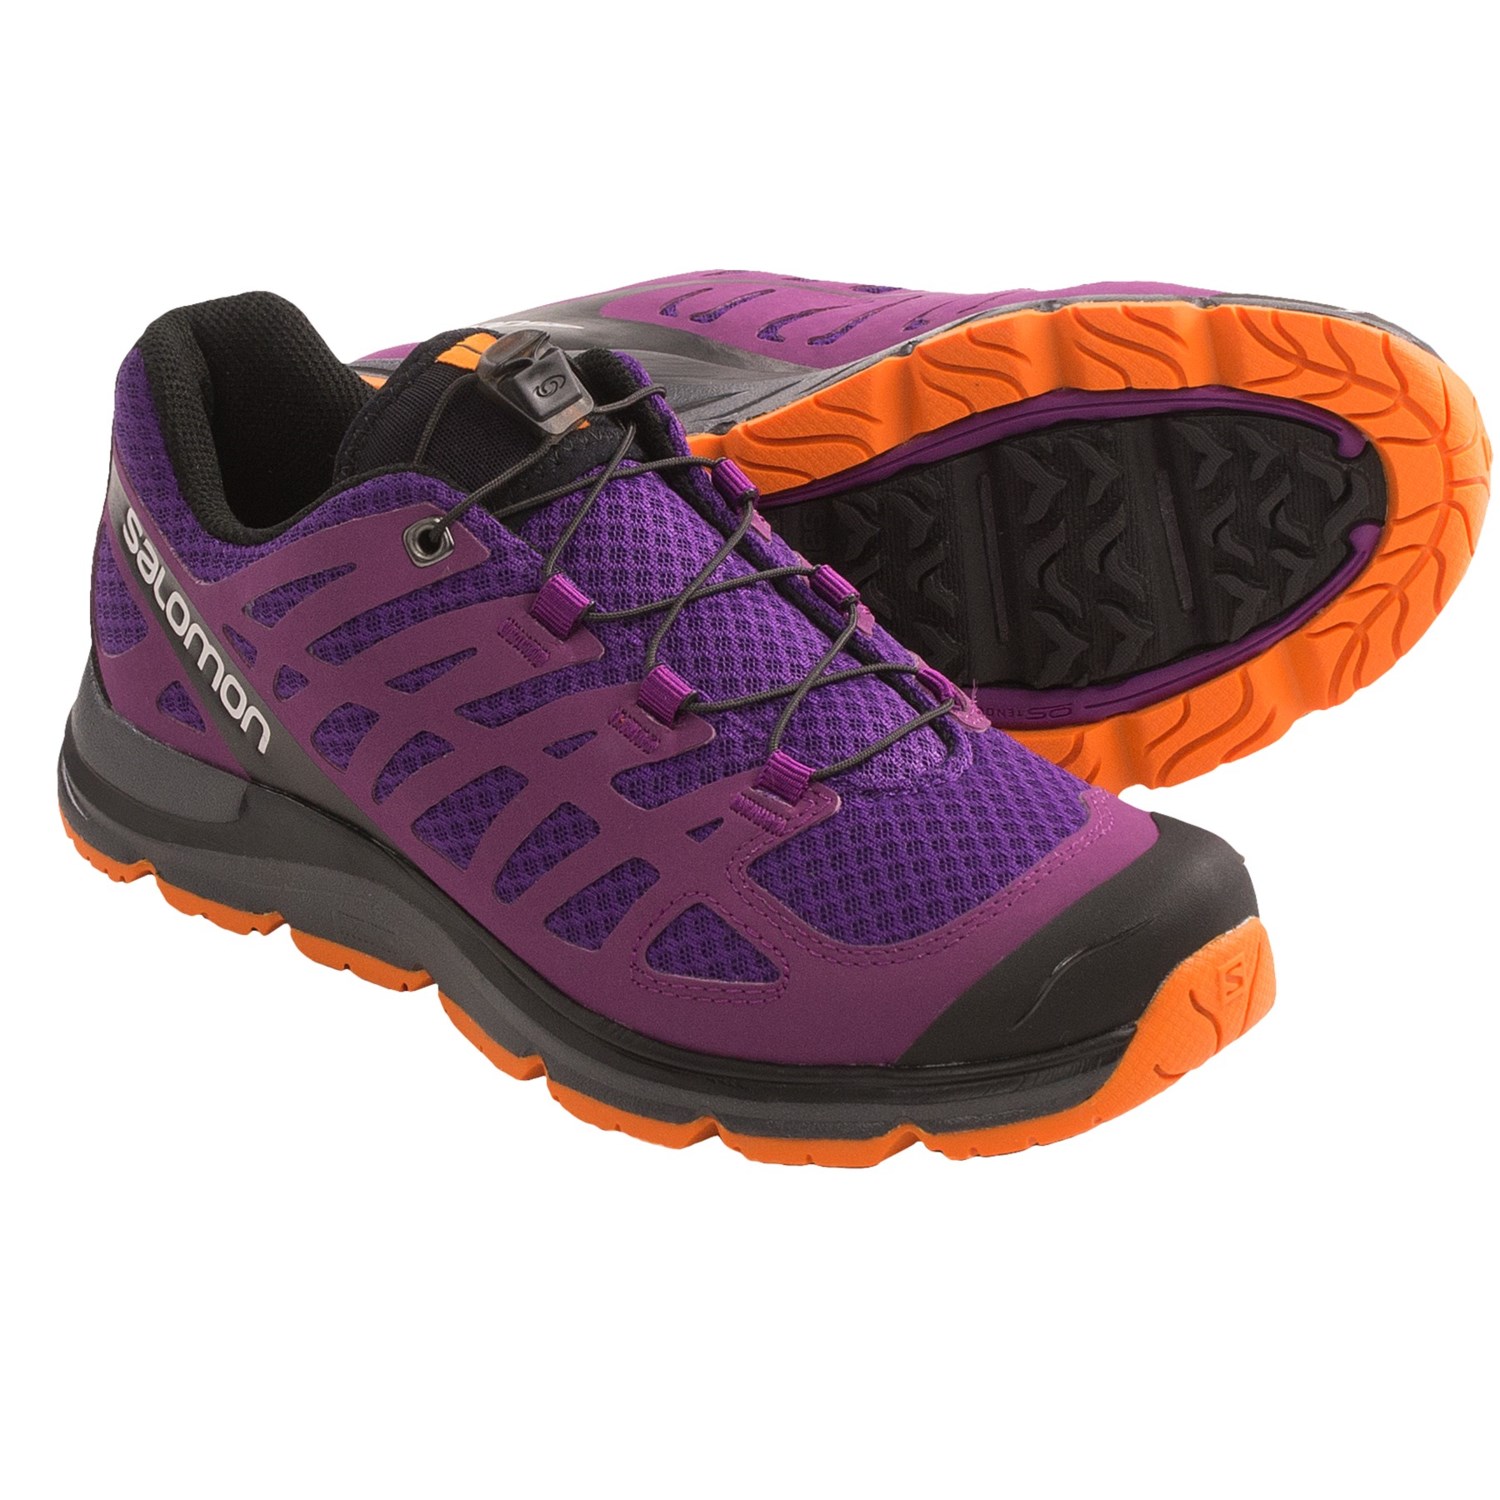 Salomon Synapse W+ Hiking Shoes (For Women) - Save 25%